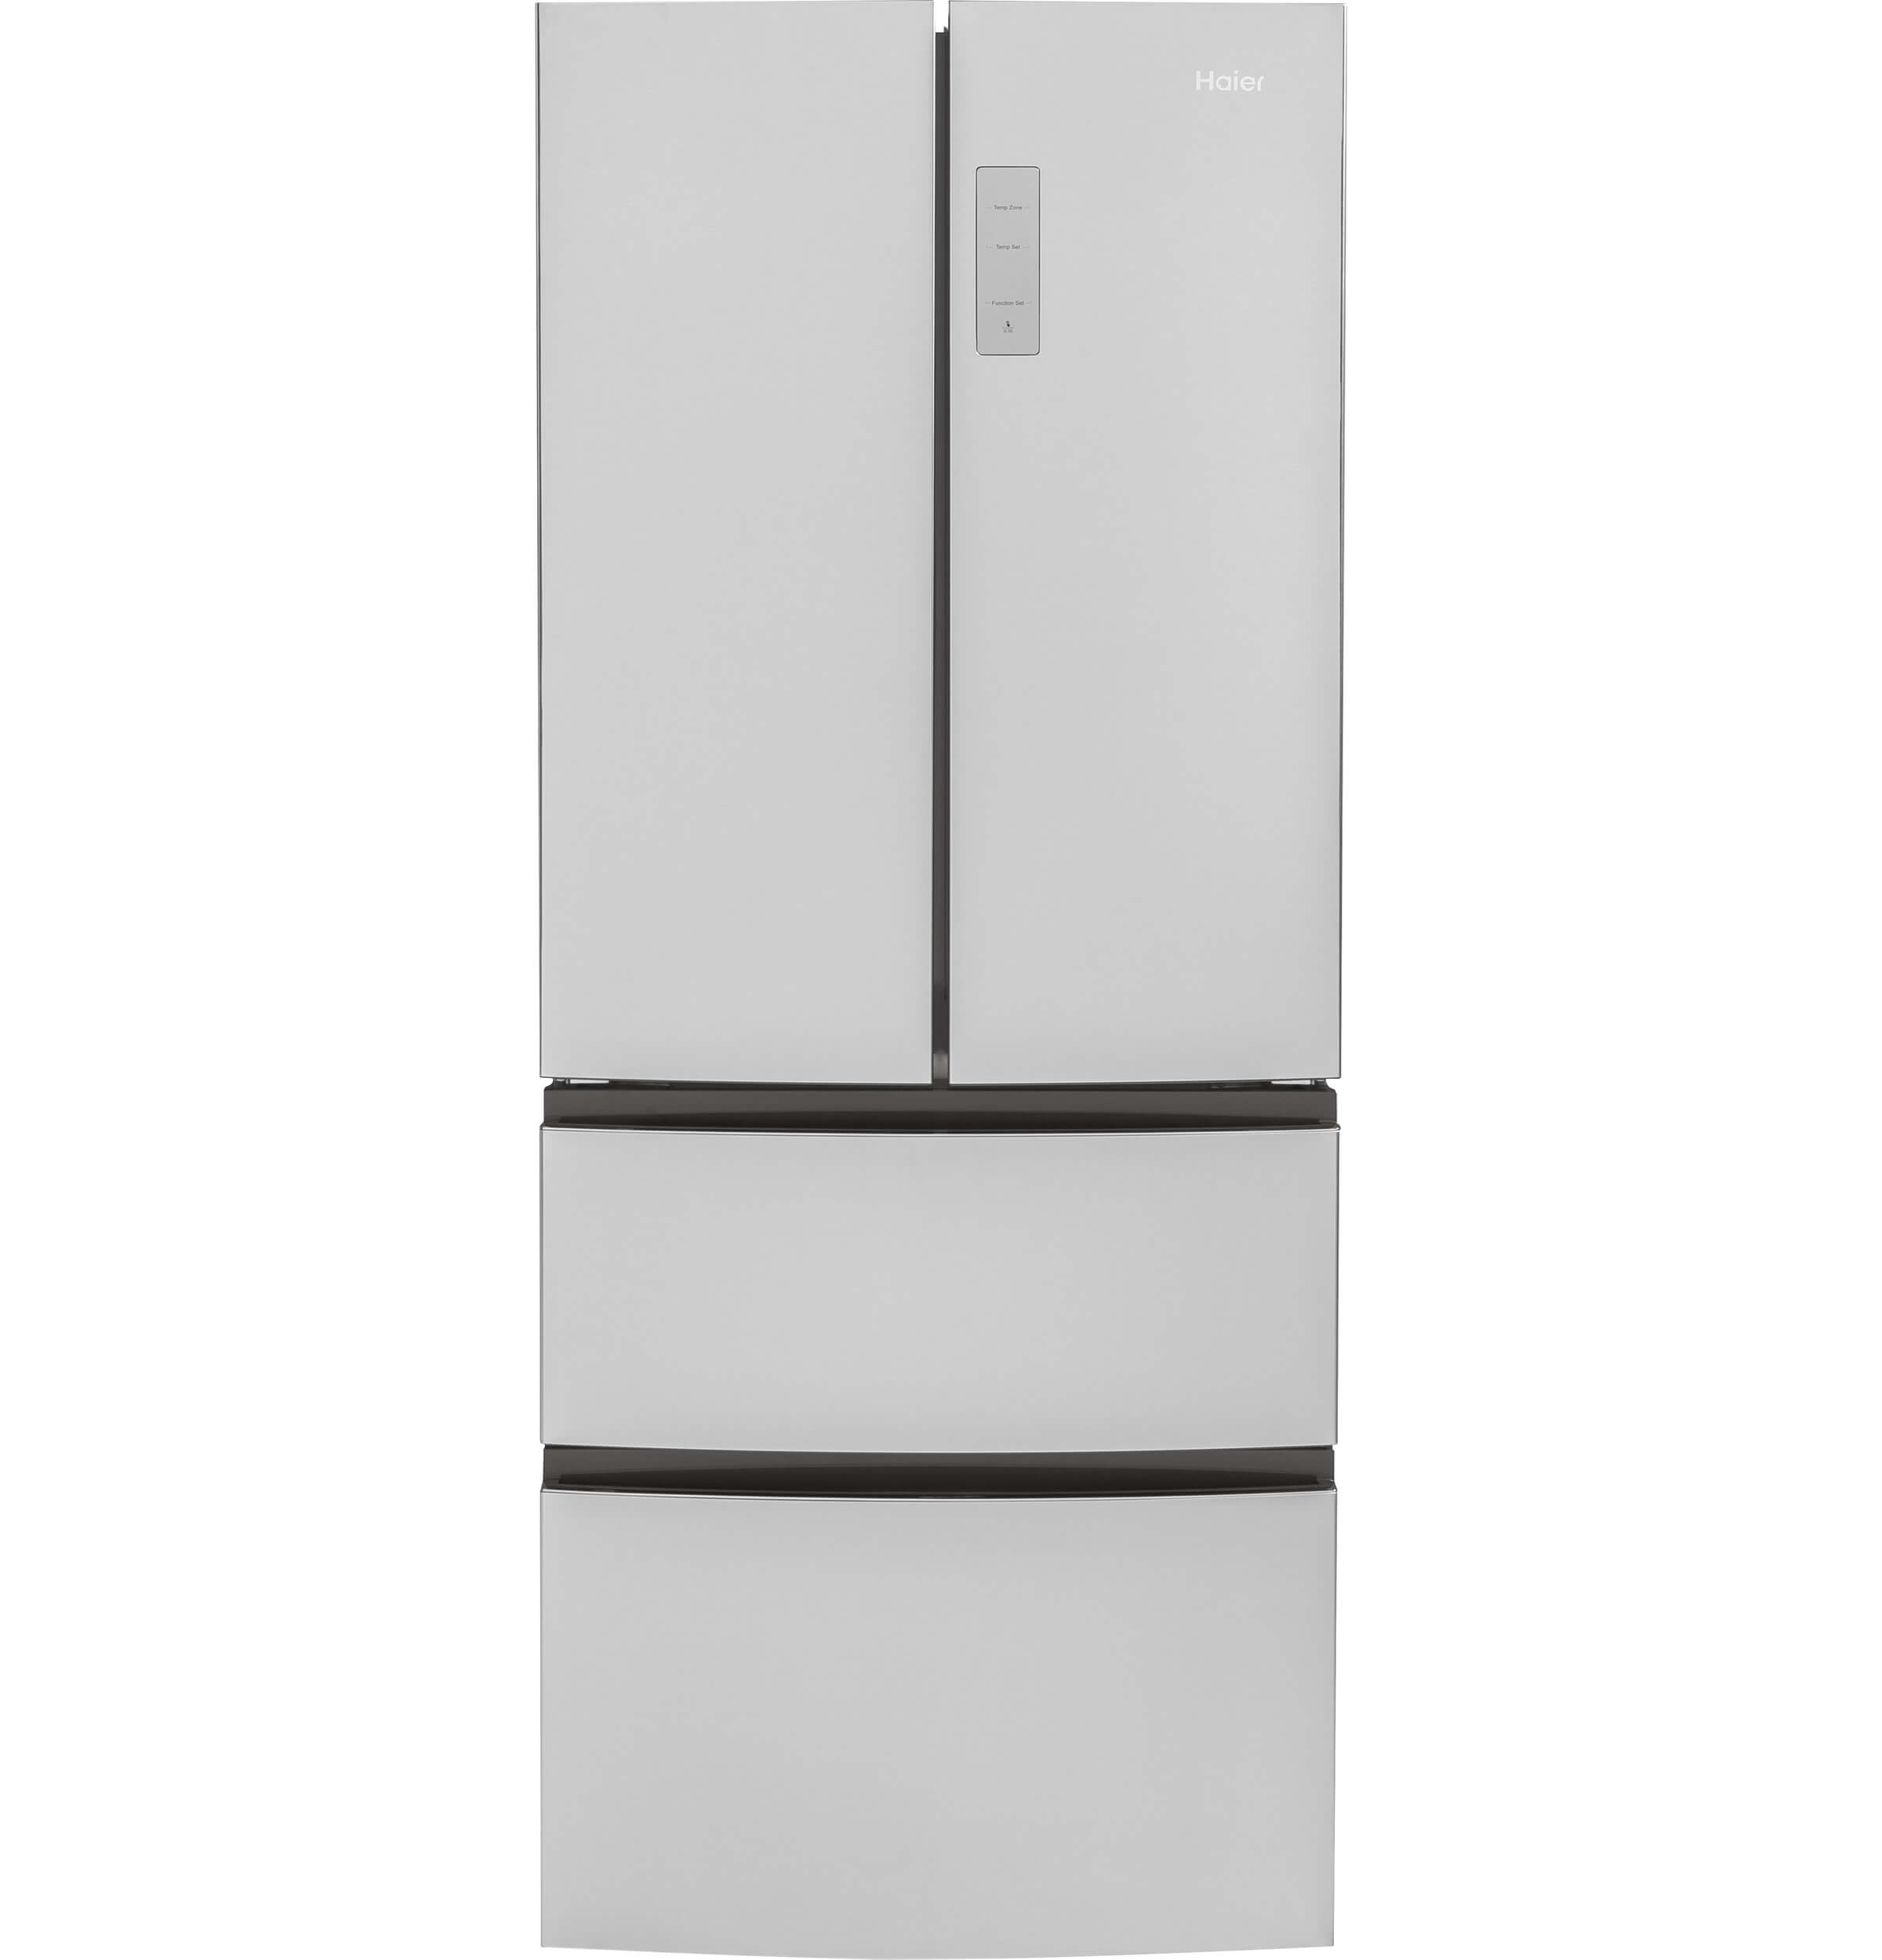 Haier HRF15N3AGS 15 Cu. Feet. Stainless French Door Refrigerator - image 1 of 7